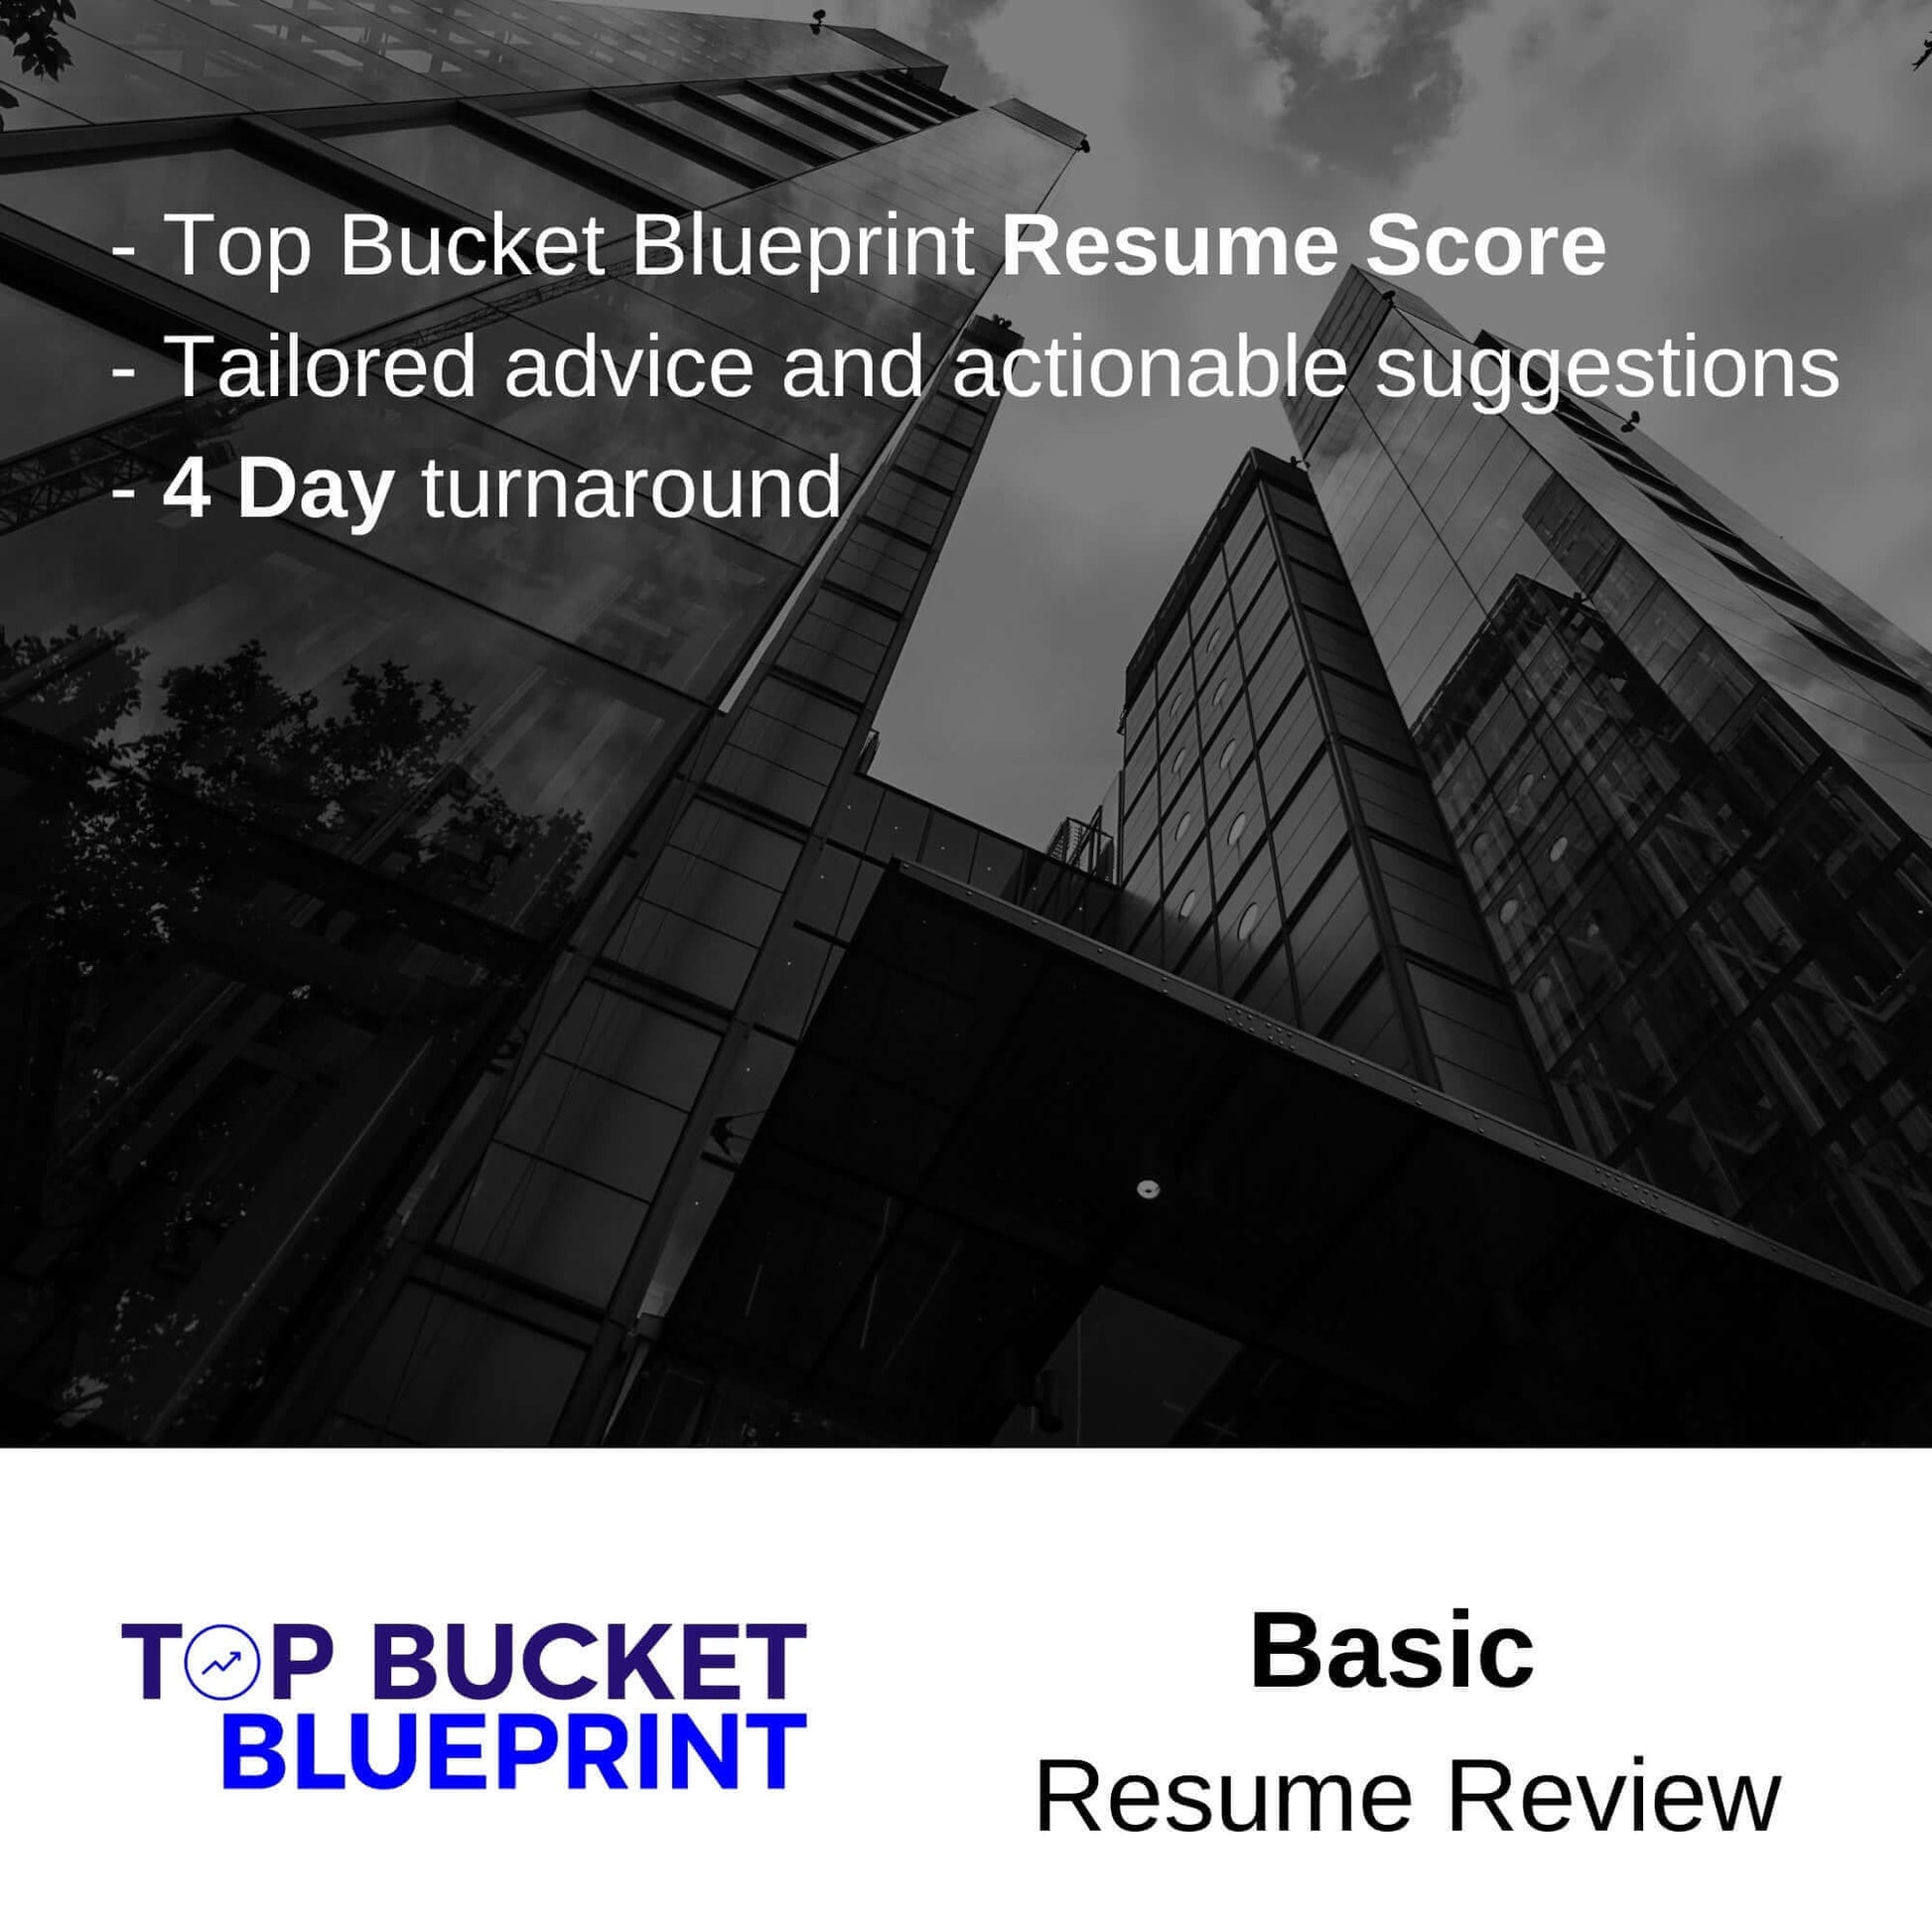 Top Bucket Blueprint Investment Banking Resume Review - Basic